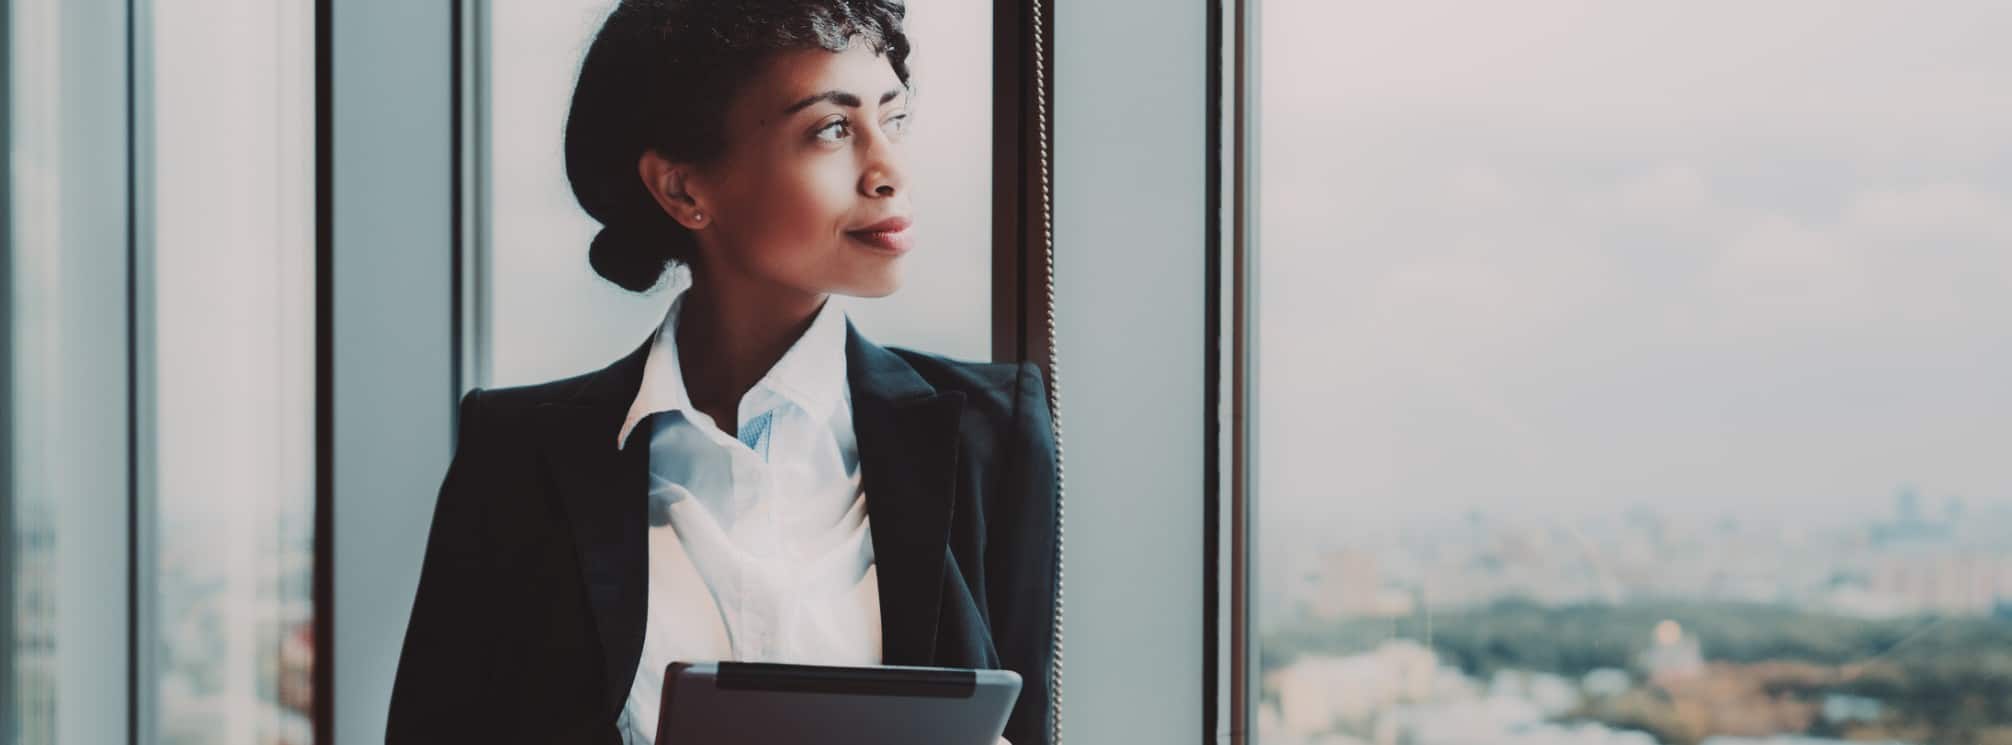 black female CEO looking out her window and holding a tablet